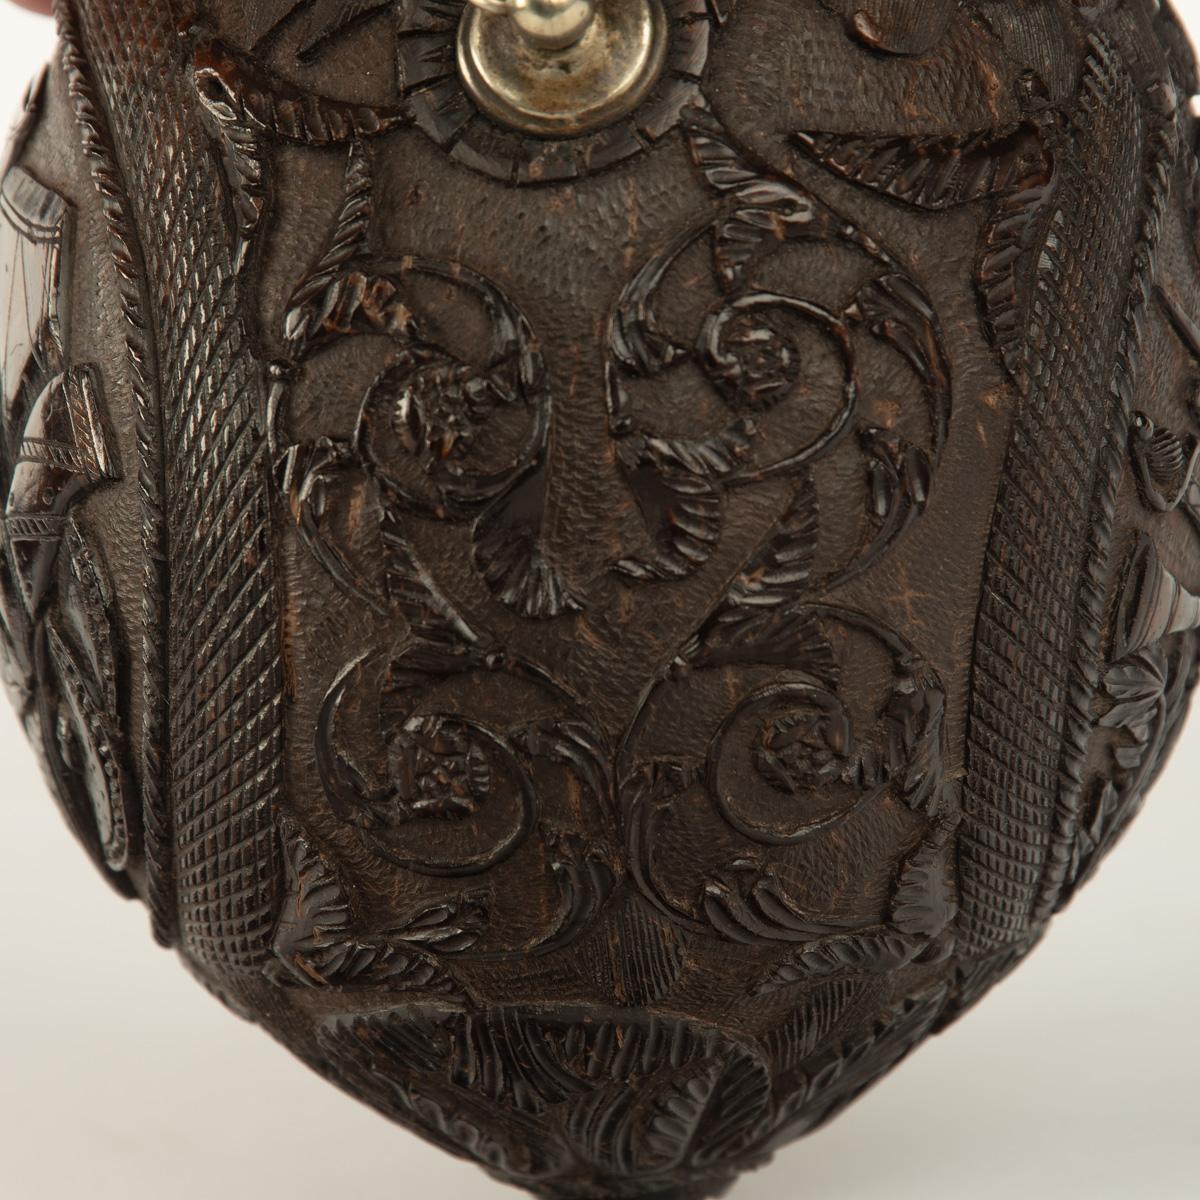 A sailor’s carved coconut Bugbear powder flask